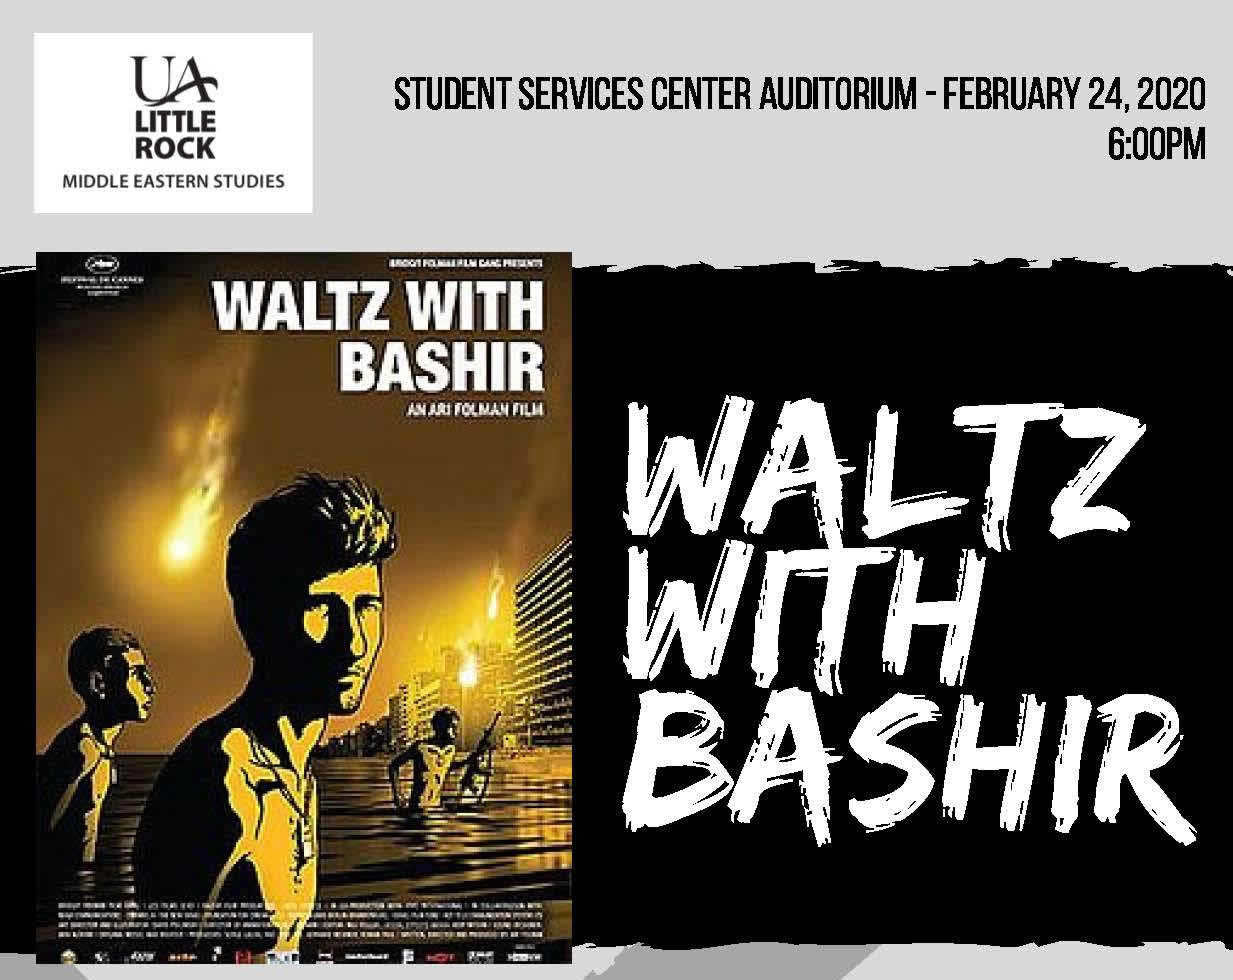 Image of the film poster "Waltz With Bashir"